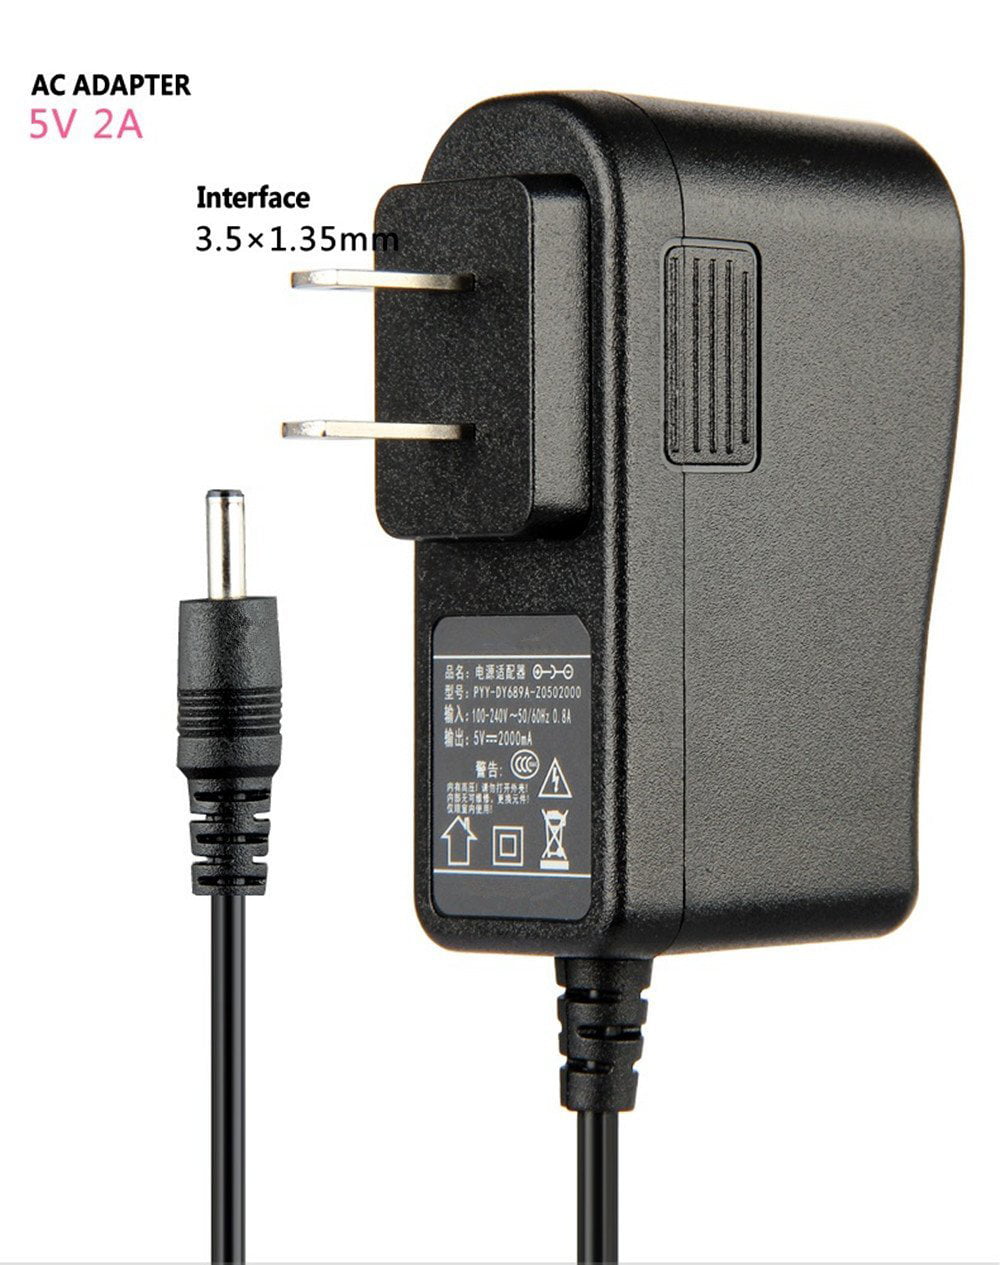 5V DC 2A 2000mA AC Adapter 3.5mm × 1.3mm Home Wall Charger Power Supply Cord New 